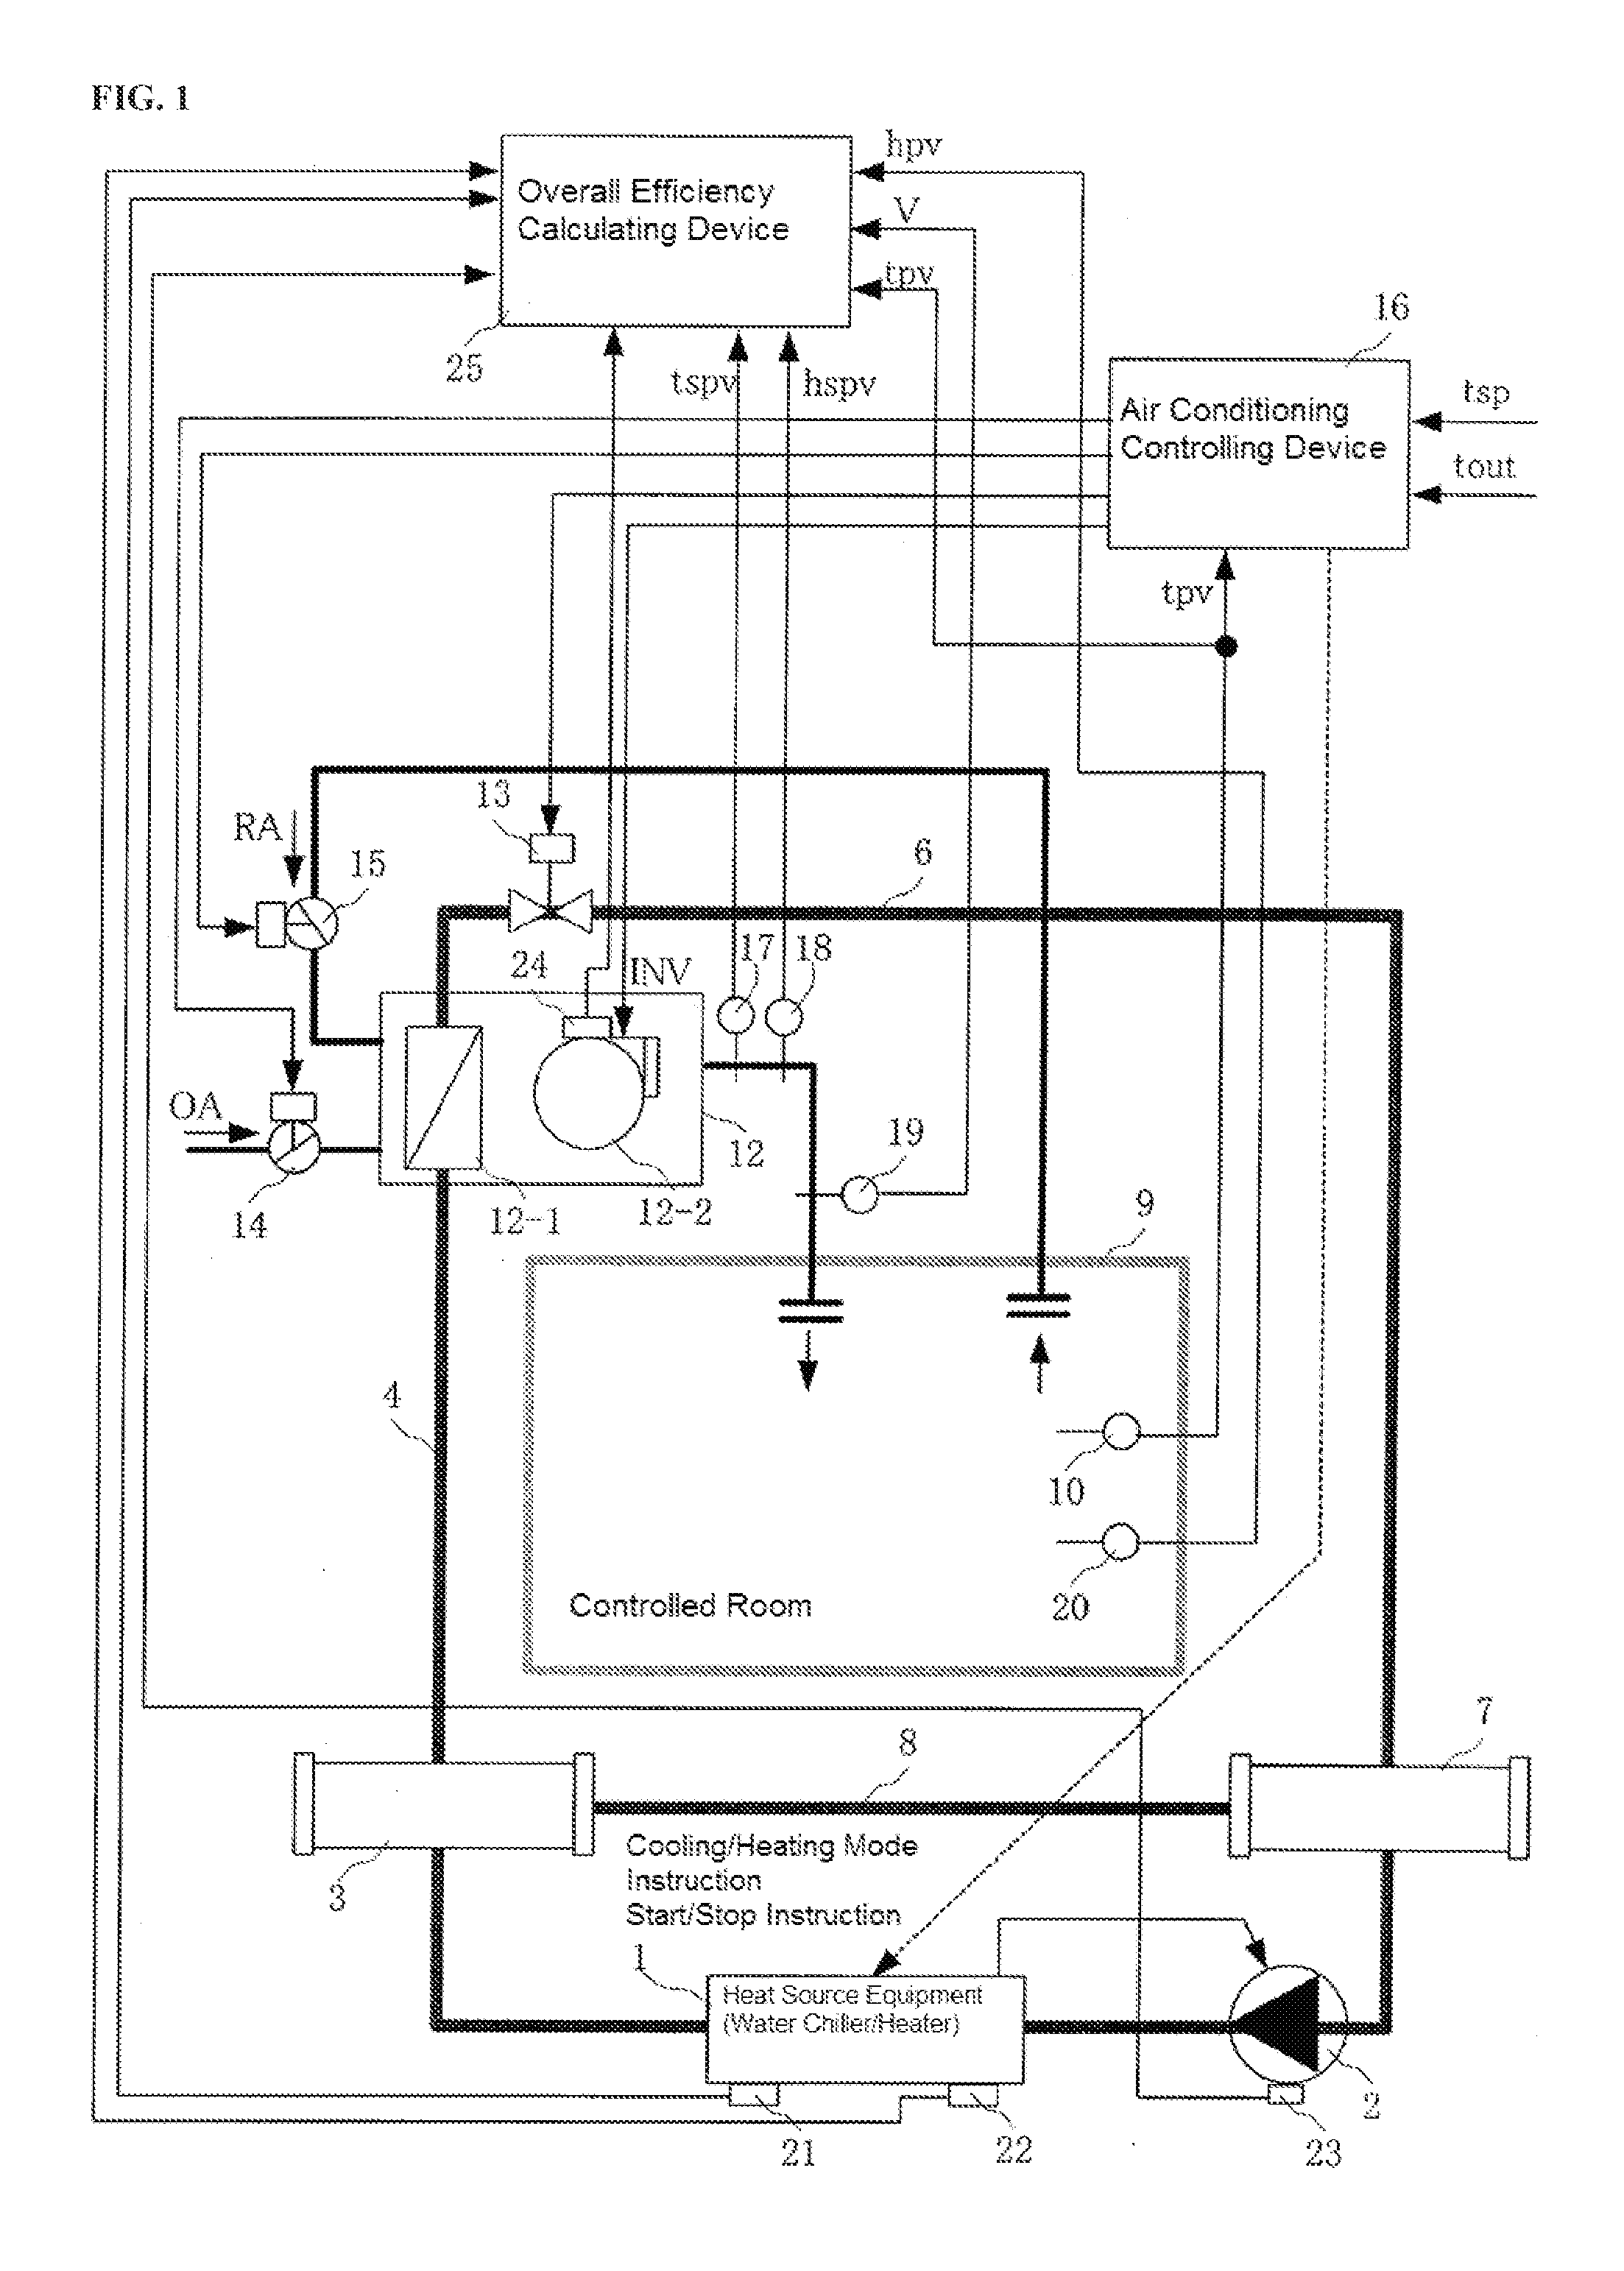 Air conditioning system overall efficiency calculating device and method